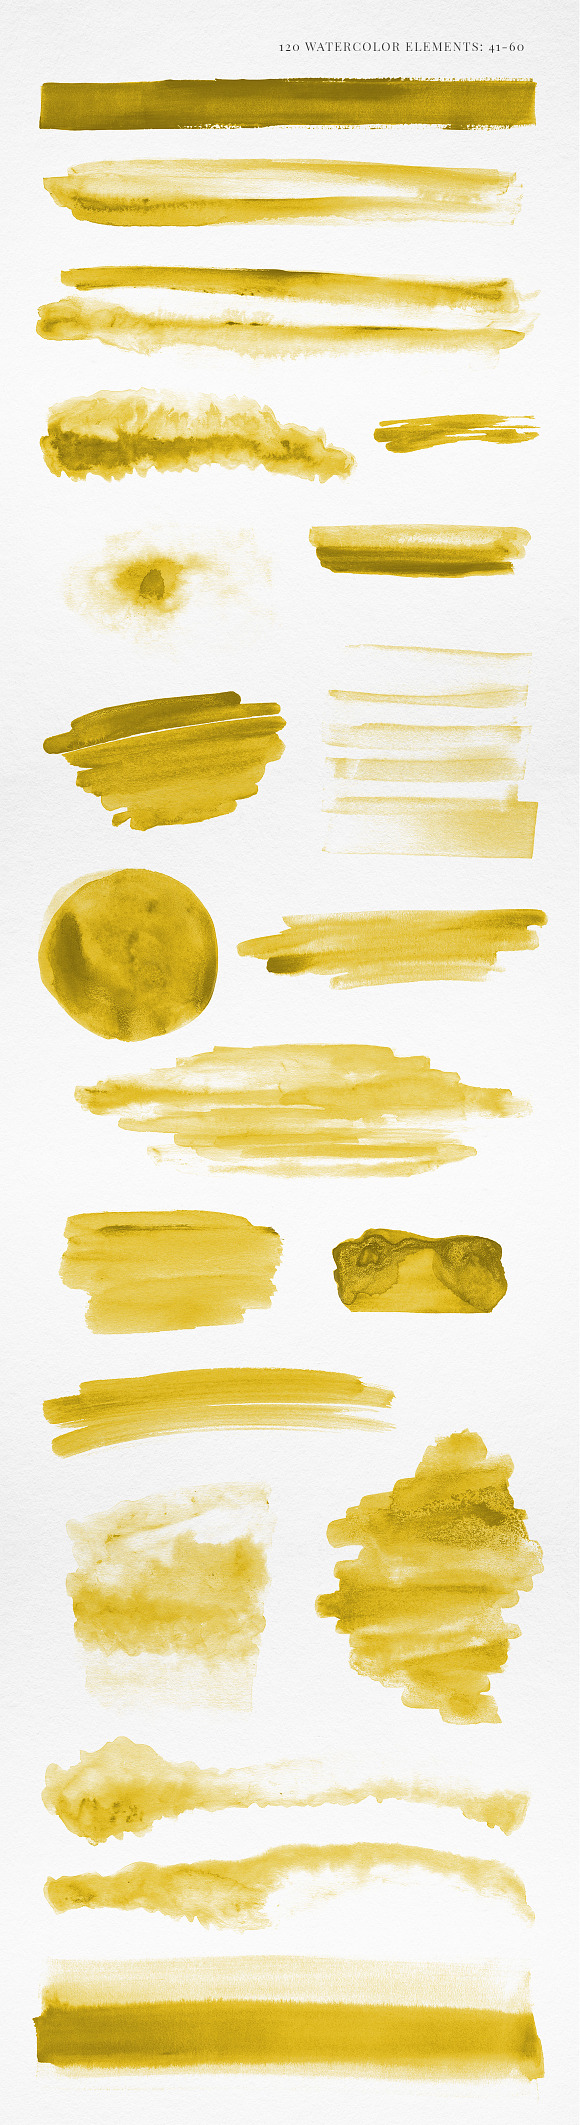 120 Watercolor Elements Yellow Gold in Textures - product preview 3